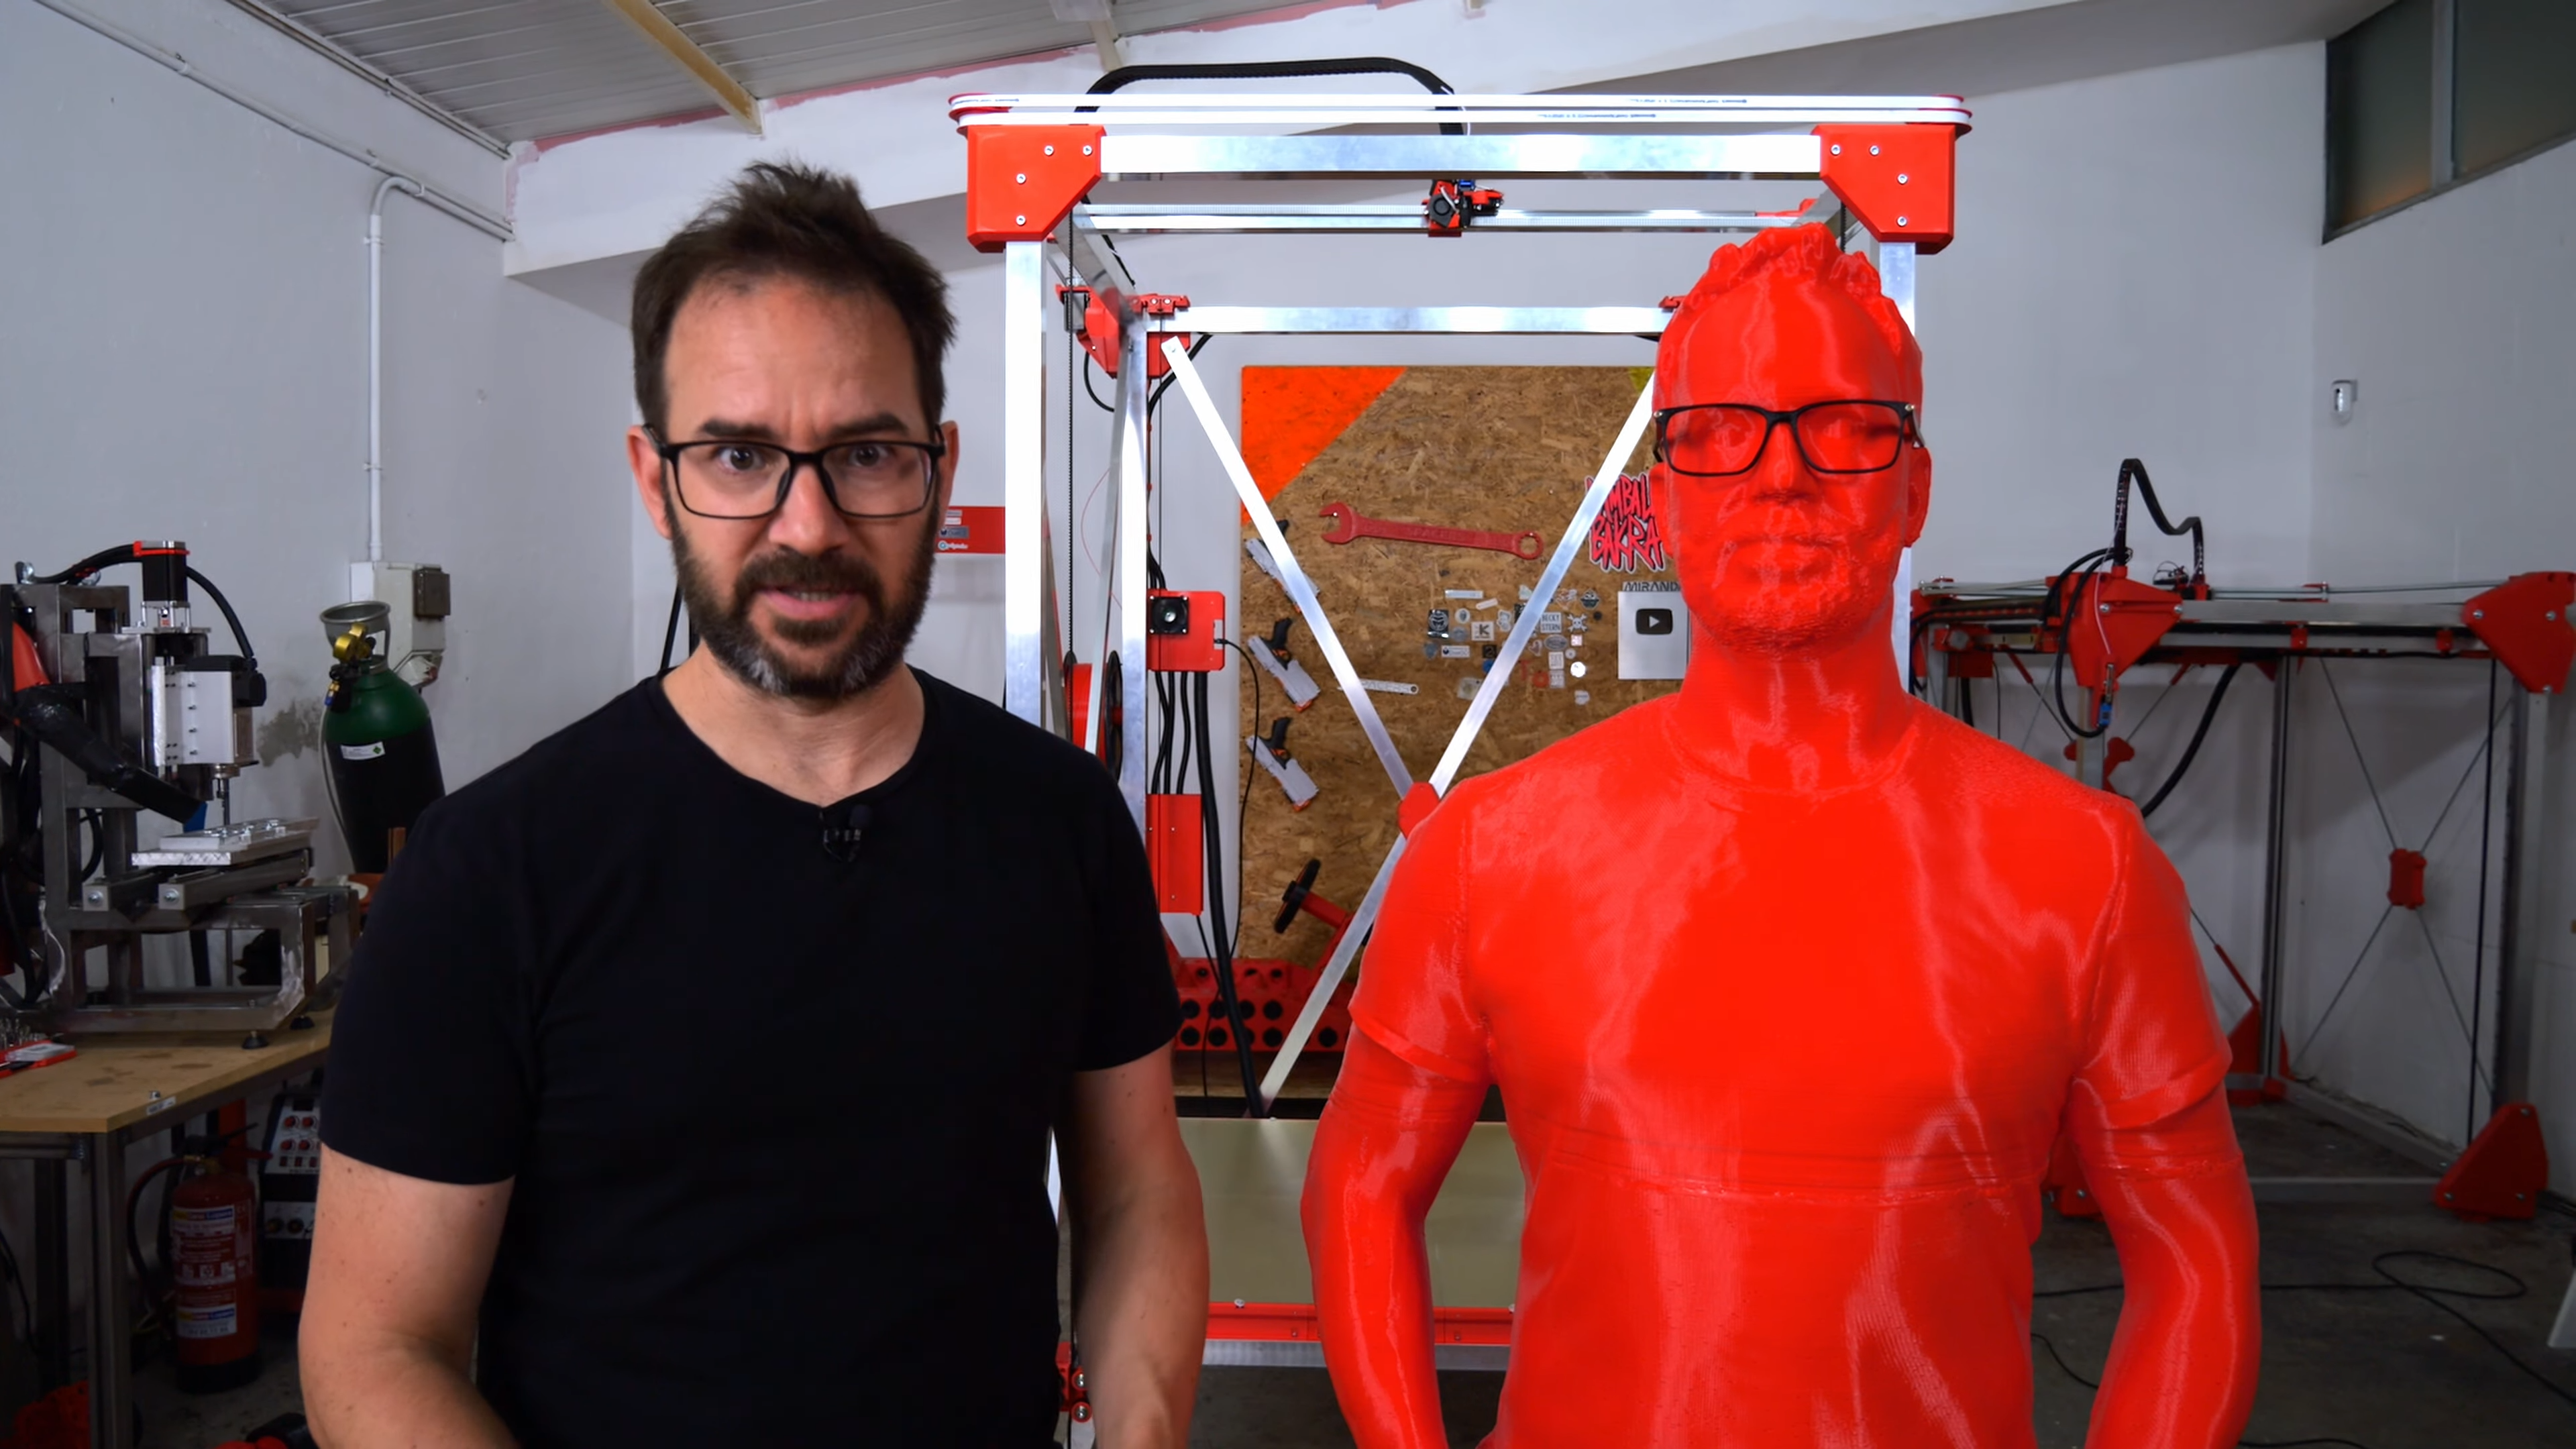 Giant 3D Printer Can Print Life-Sized Human Statues